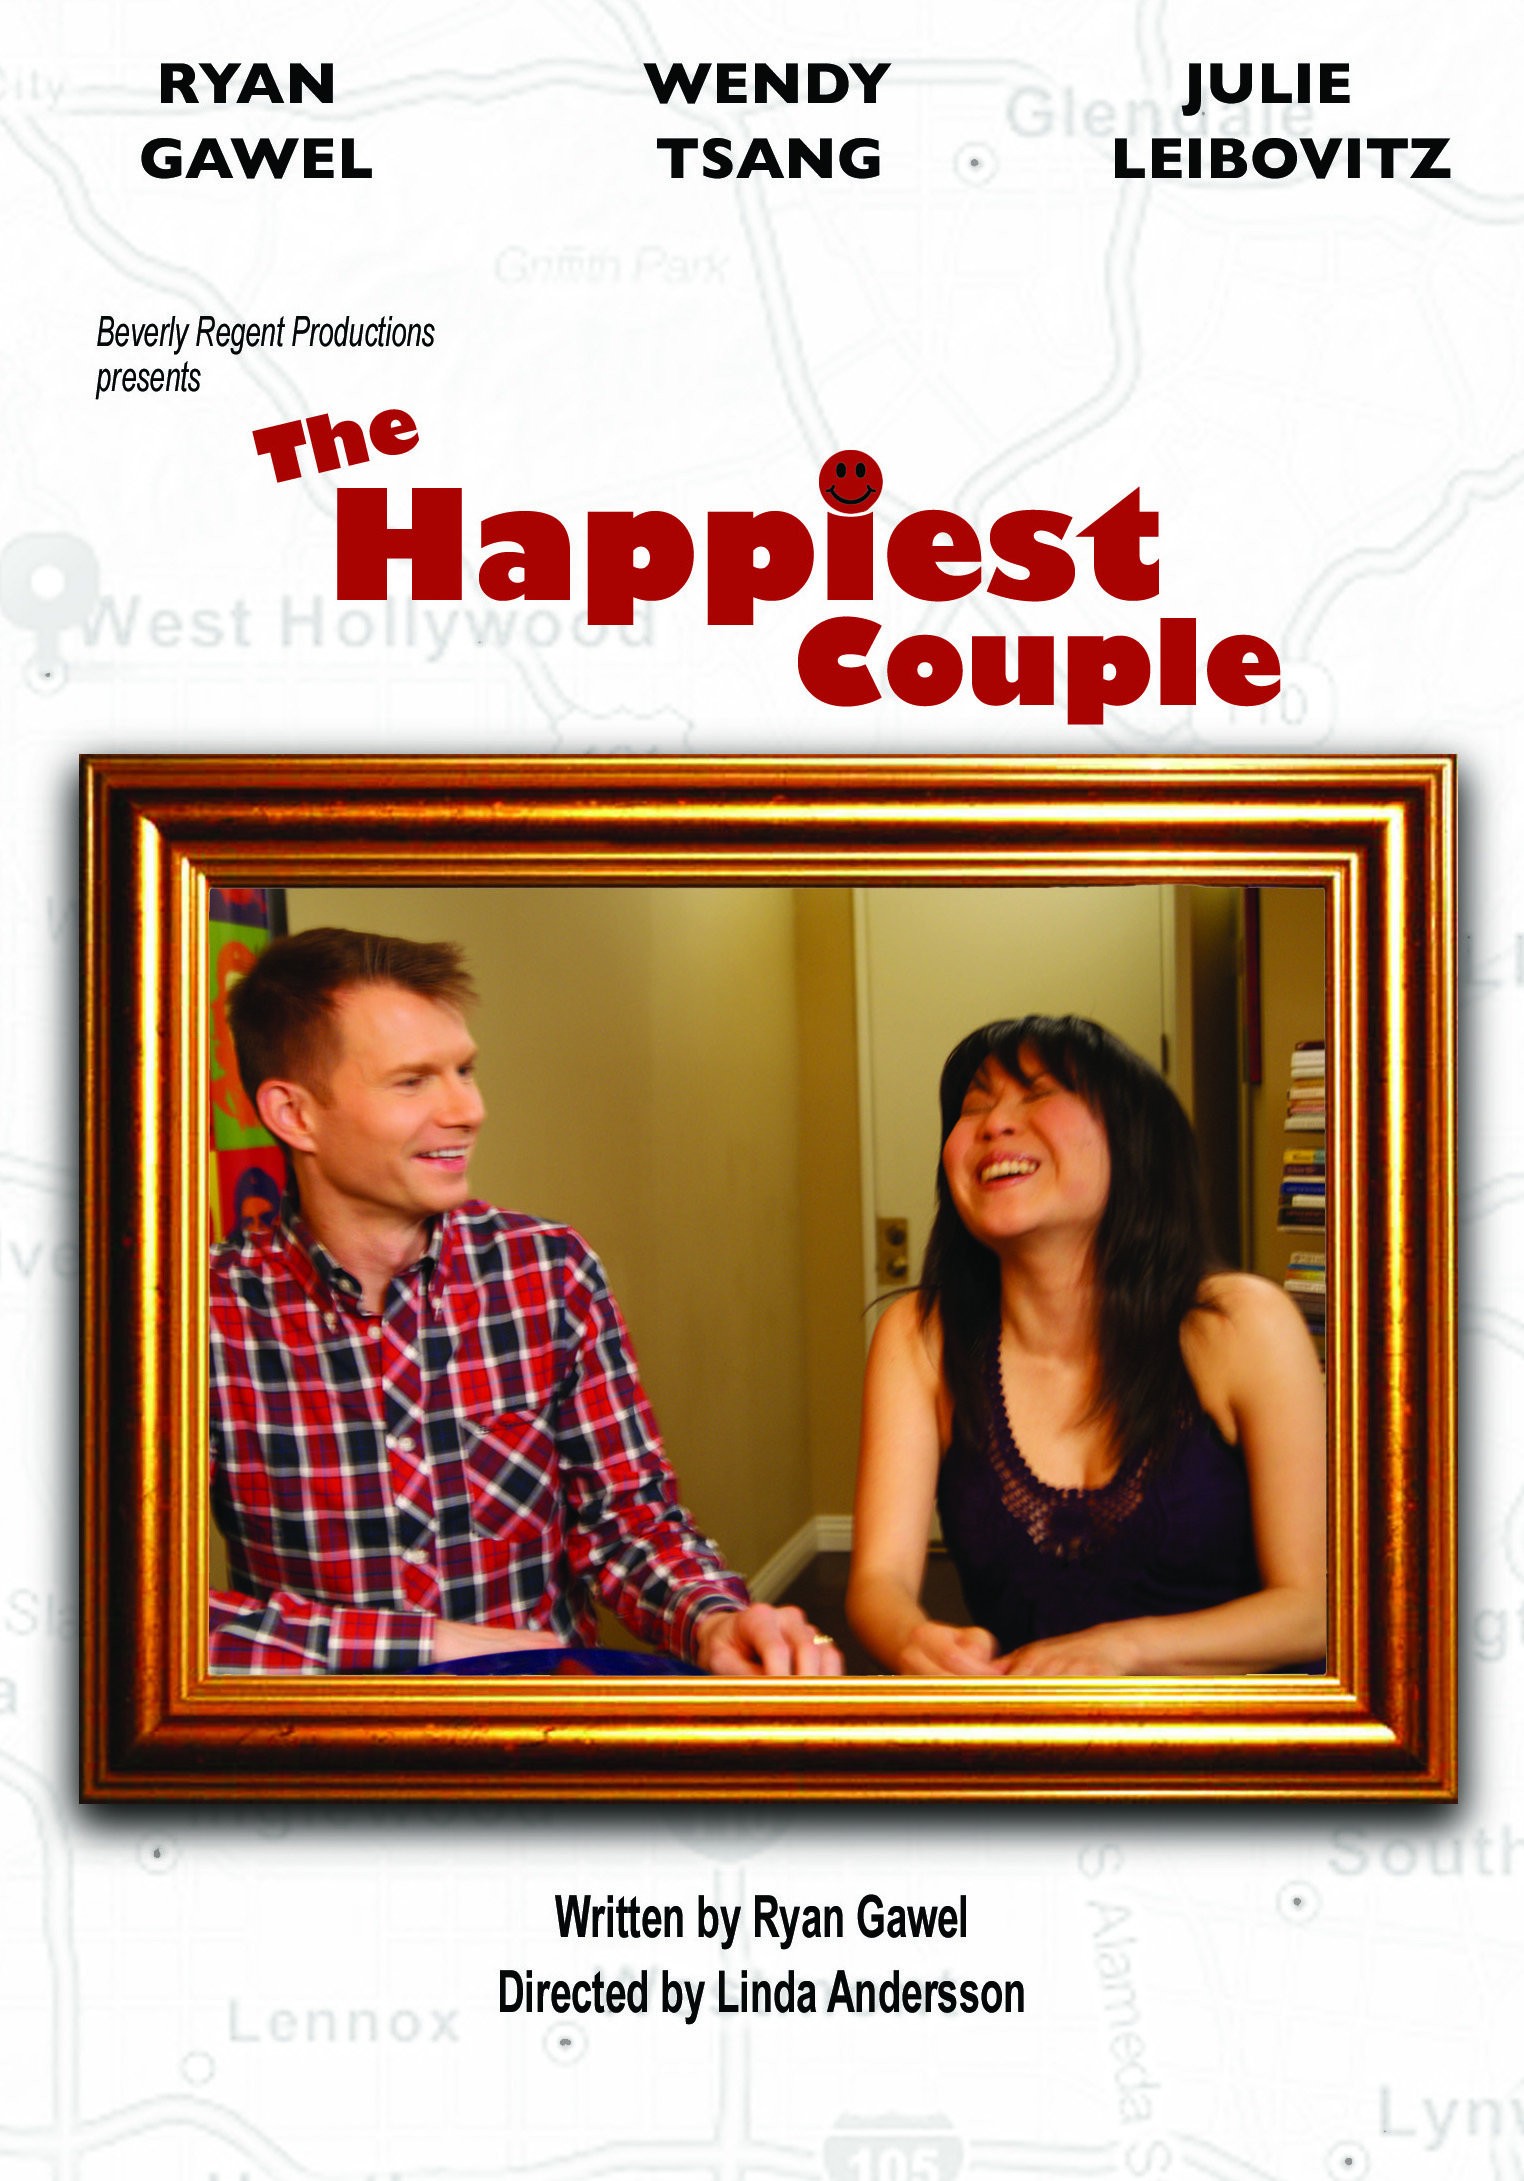 Mega Sized Movie Poster Image for The Happiest Couple